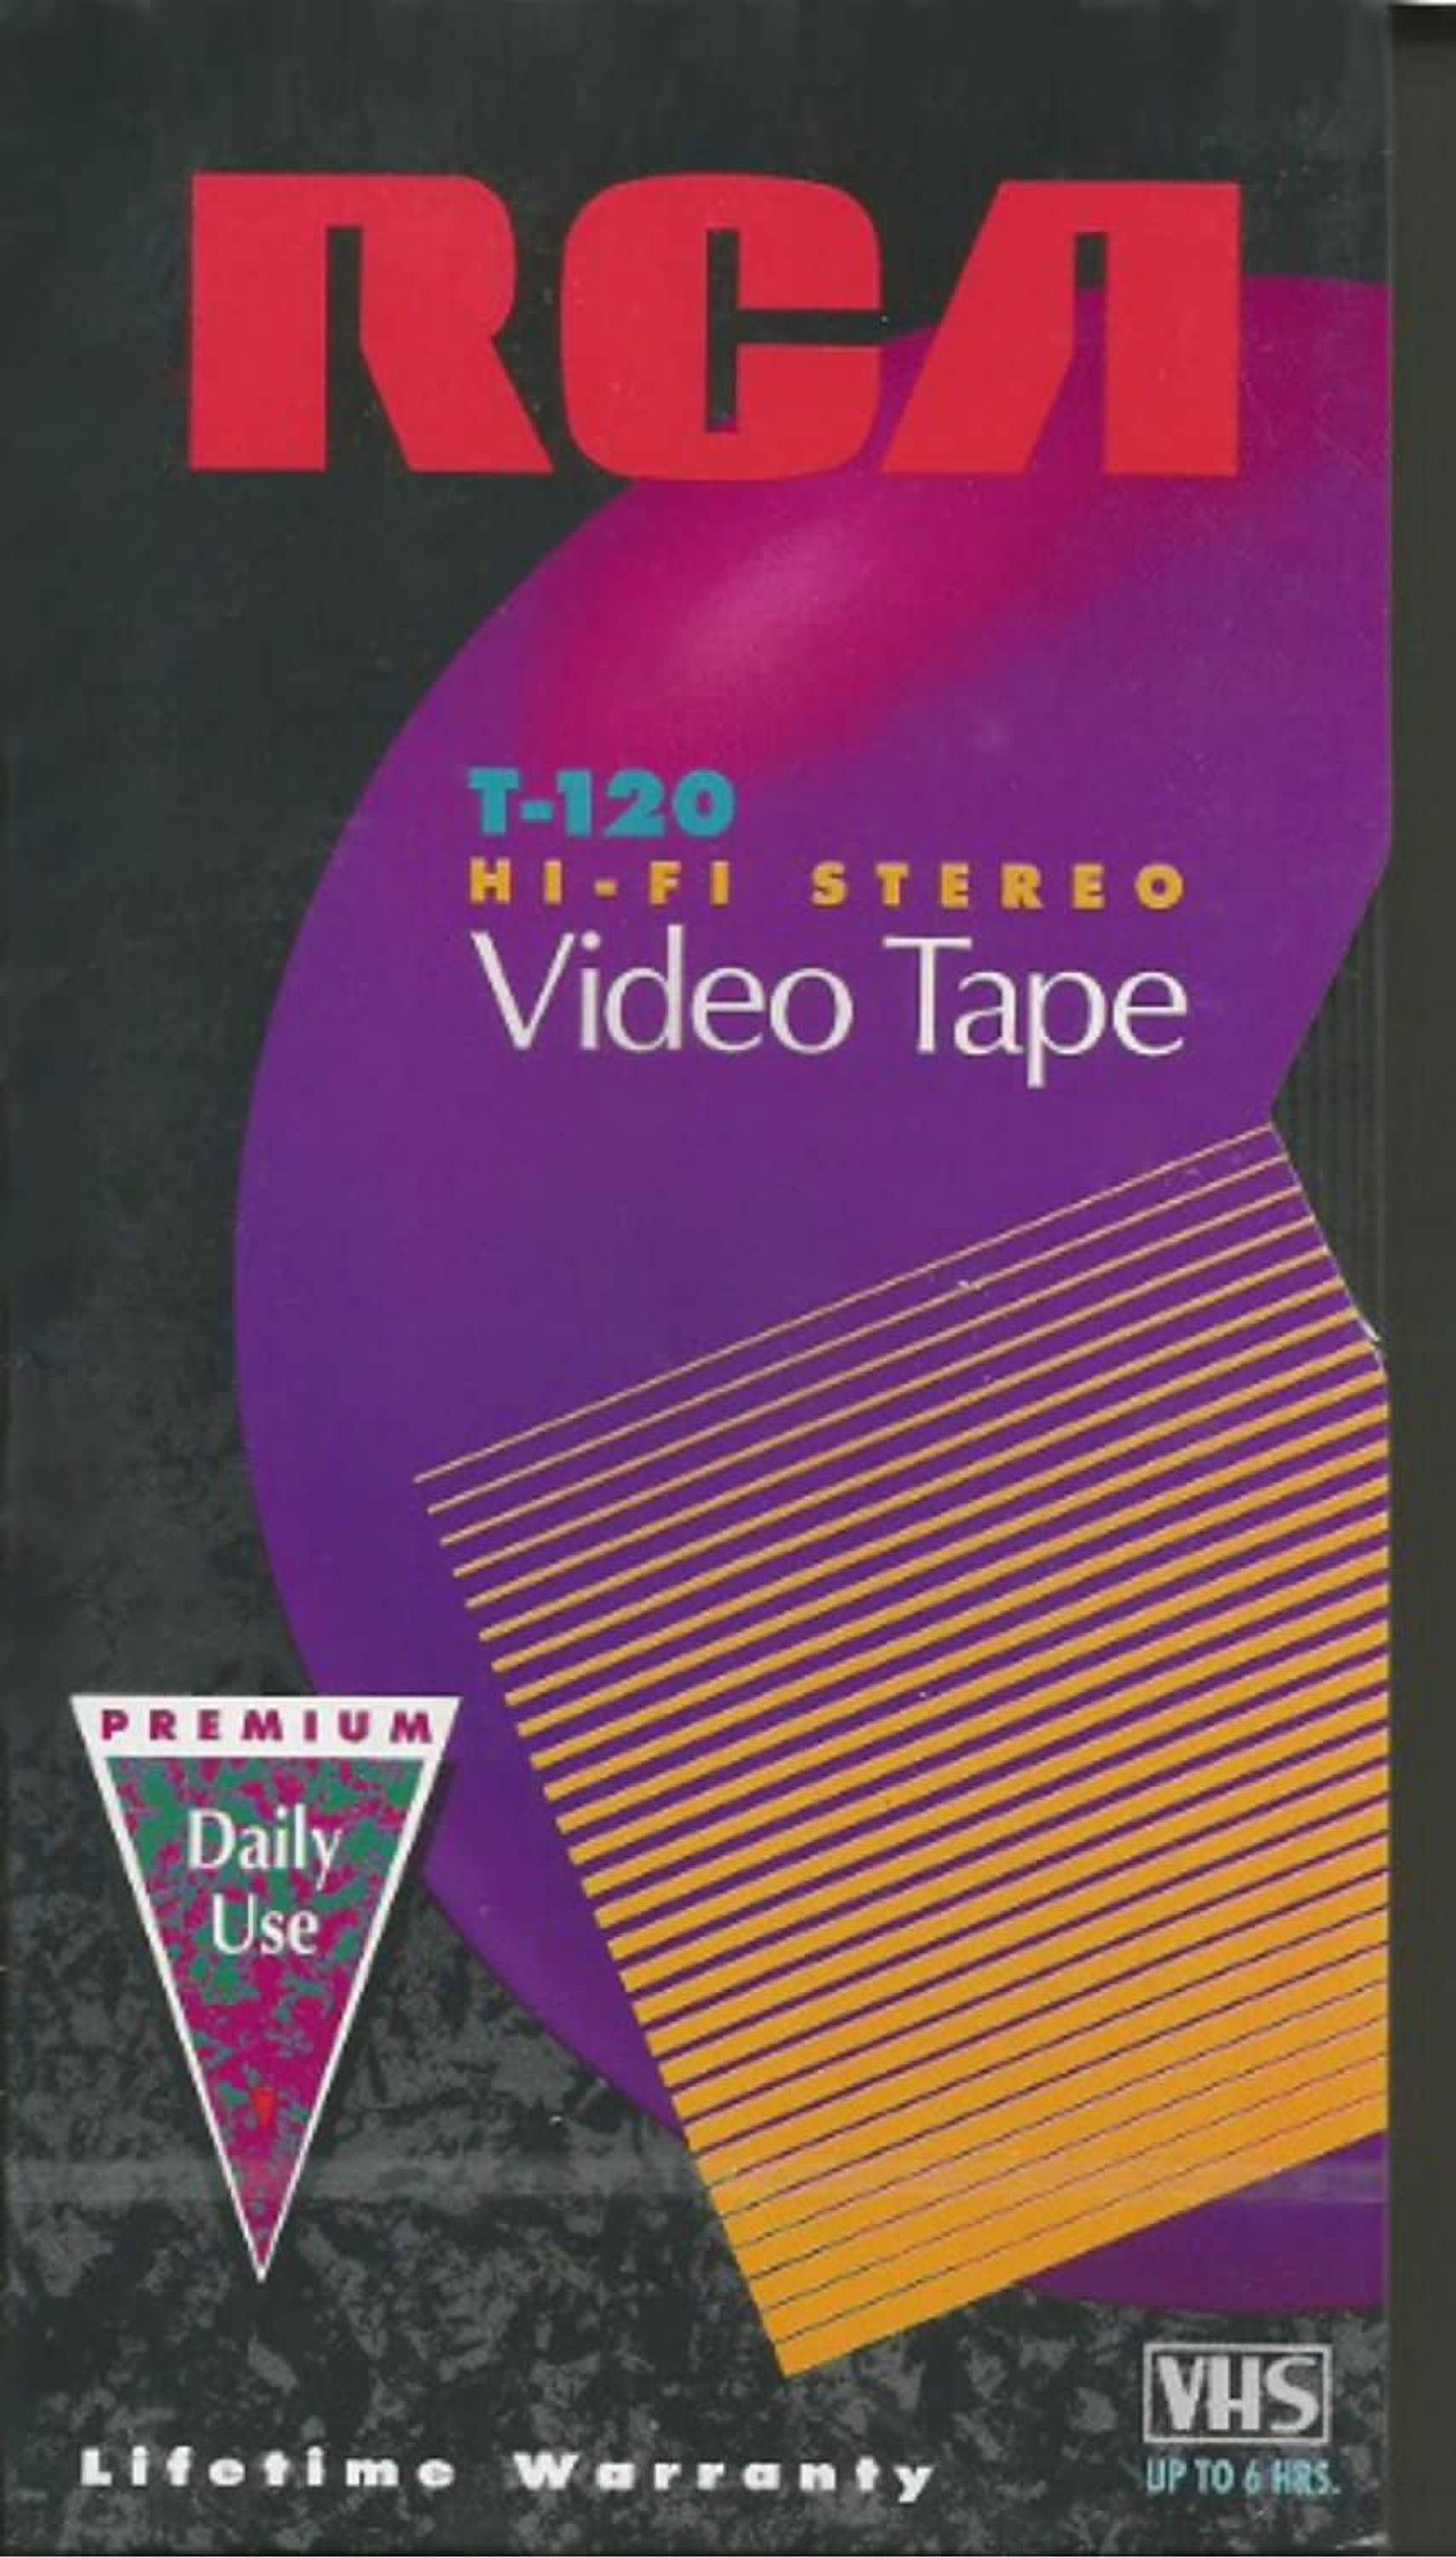 RCA T-120 VHS Videotapes, 3-Pack - image 2 of 3